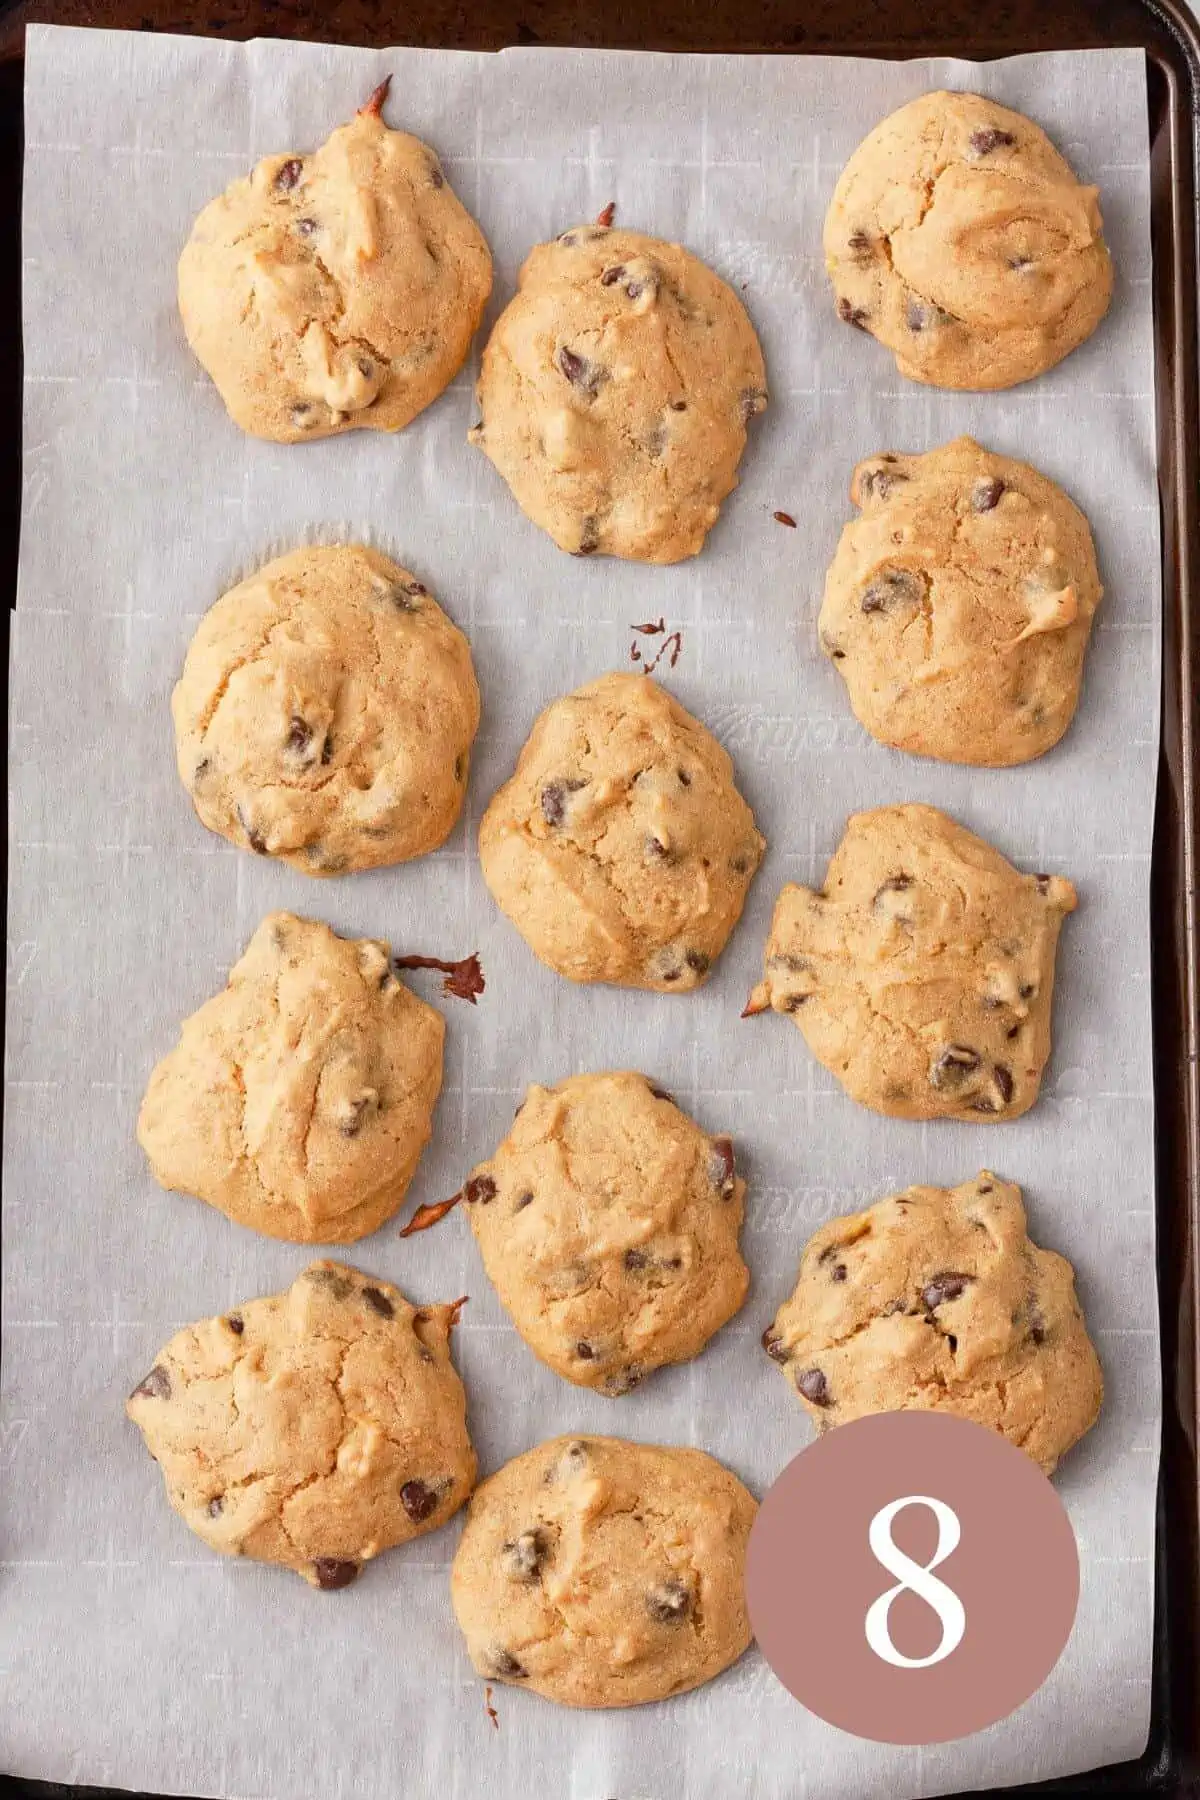 Baked cookies on parchment paper